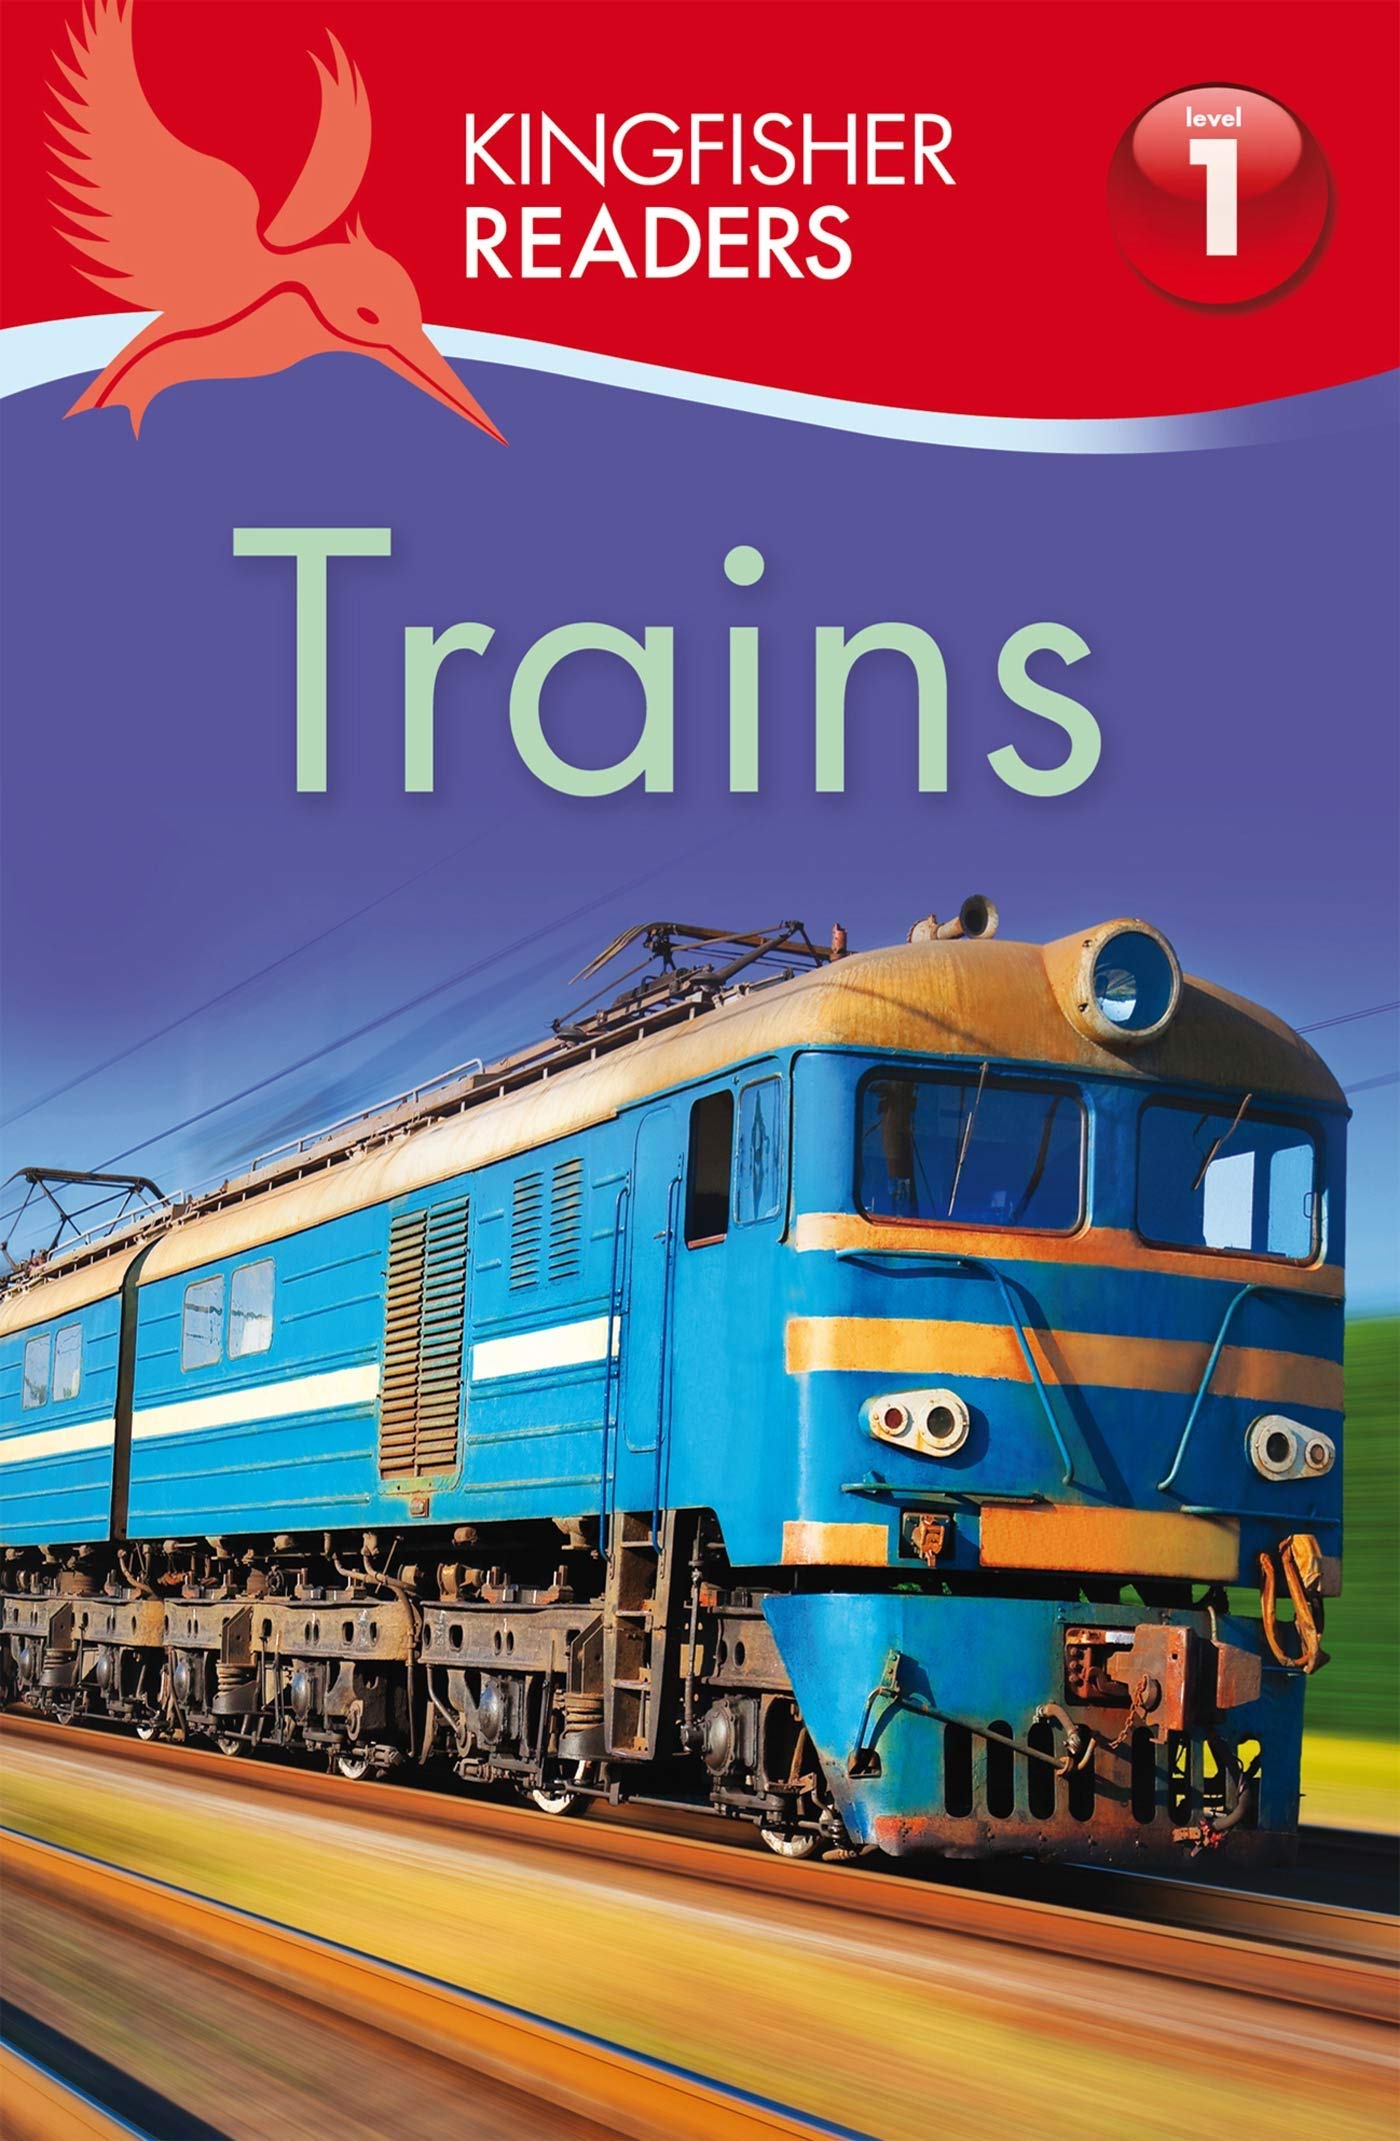 Kingfisher Readers: Trains